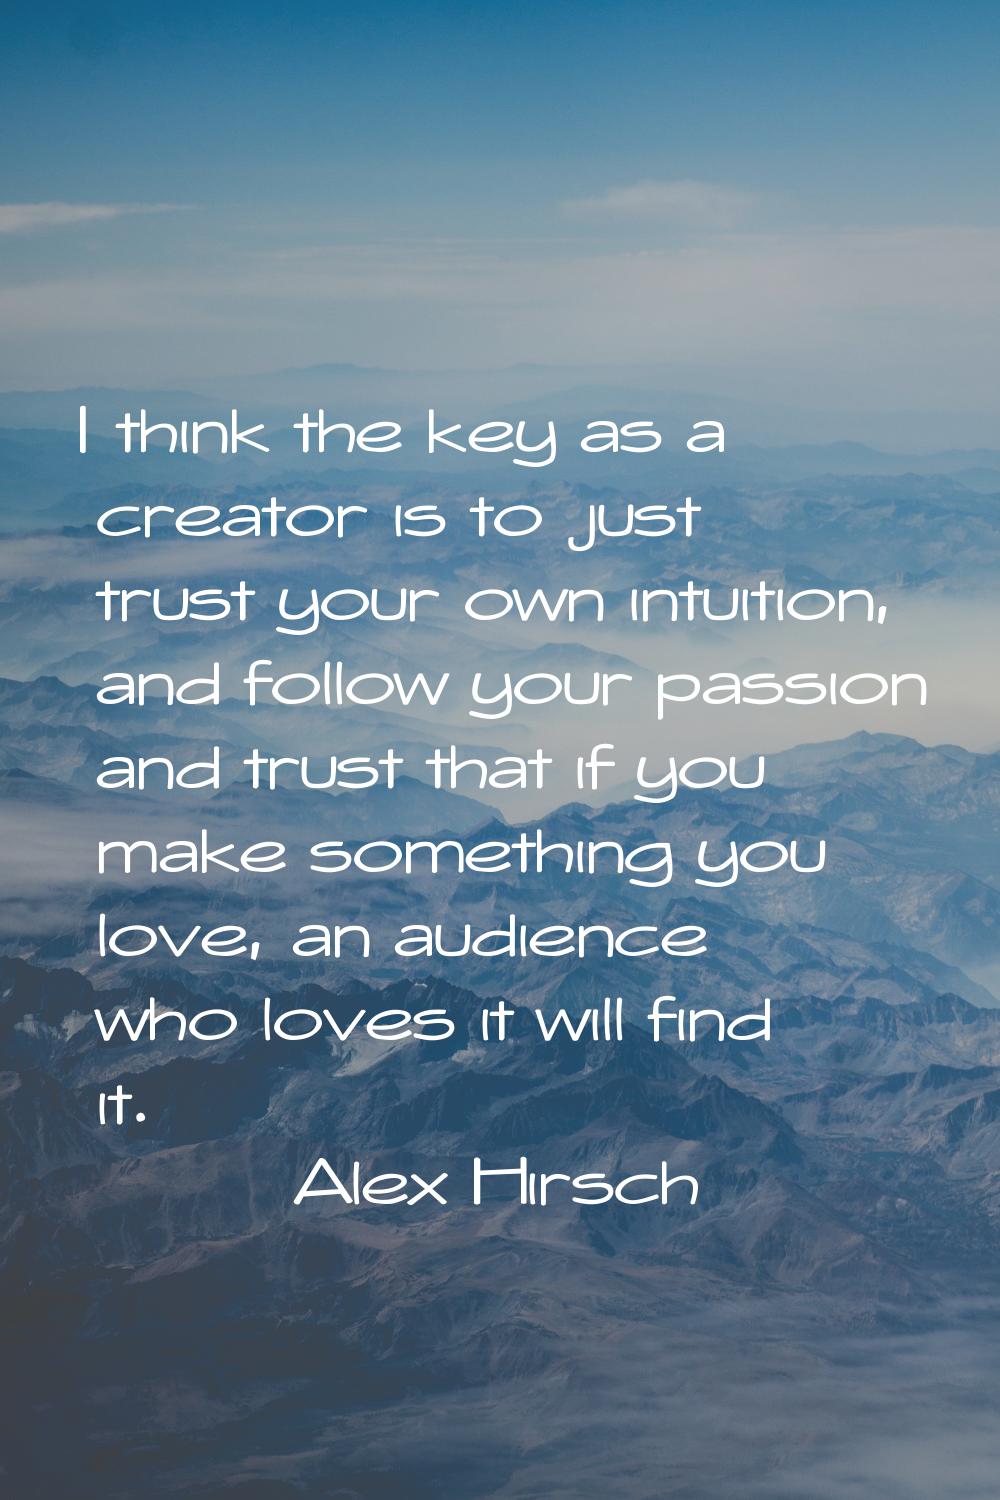 I think the key as a creator is to just trust your own intuition, and follow your passion and trust